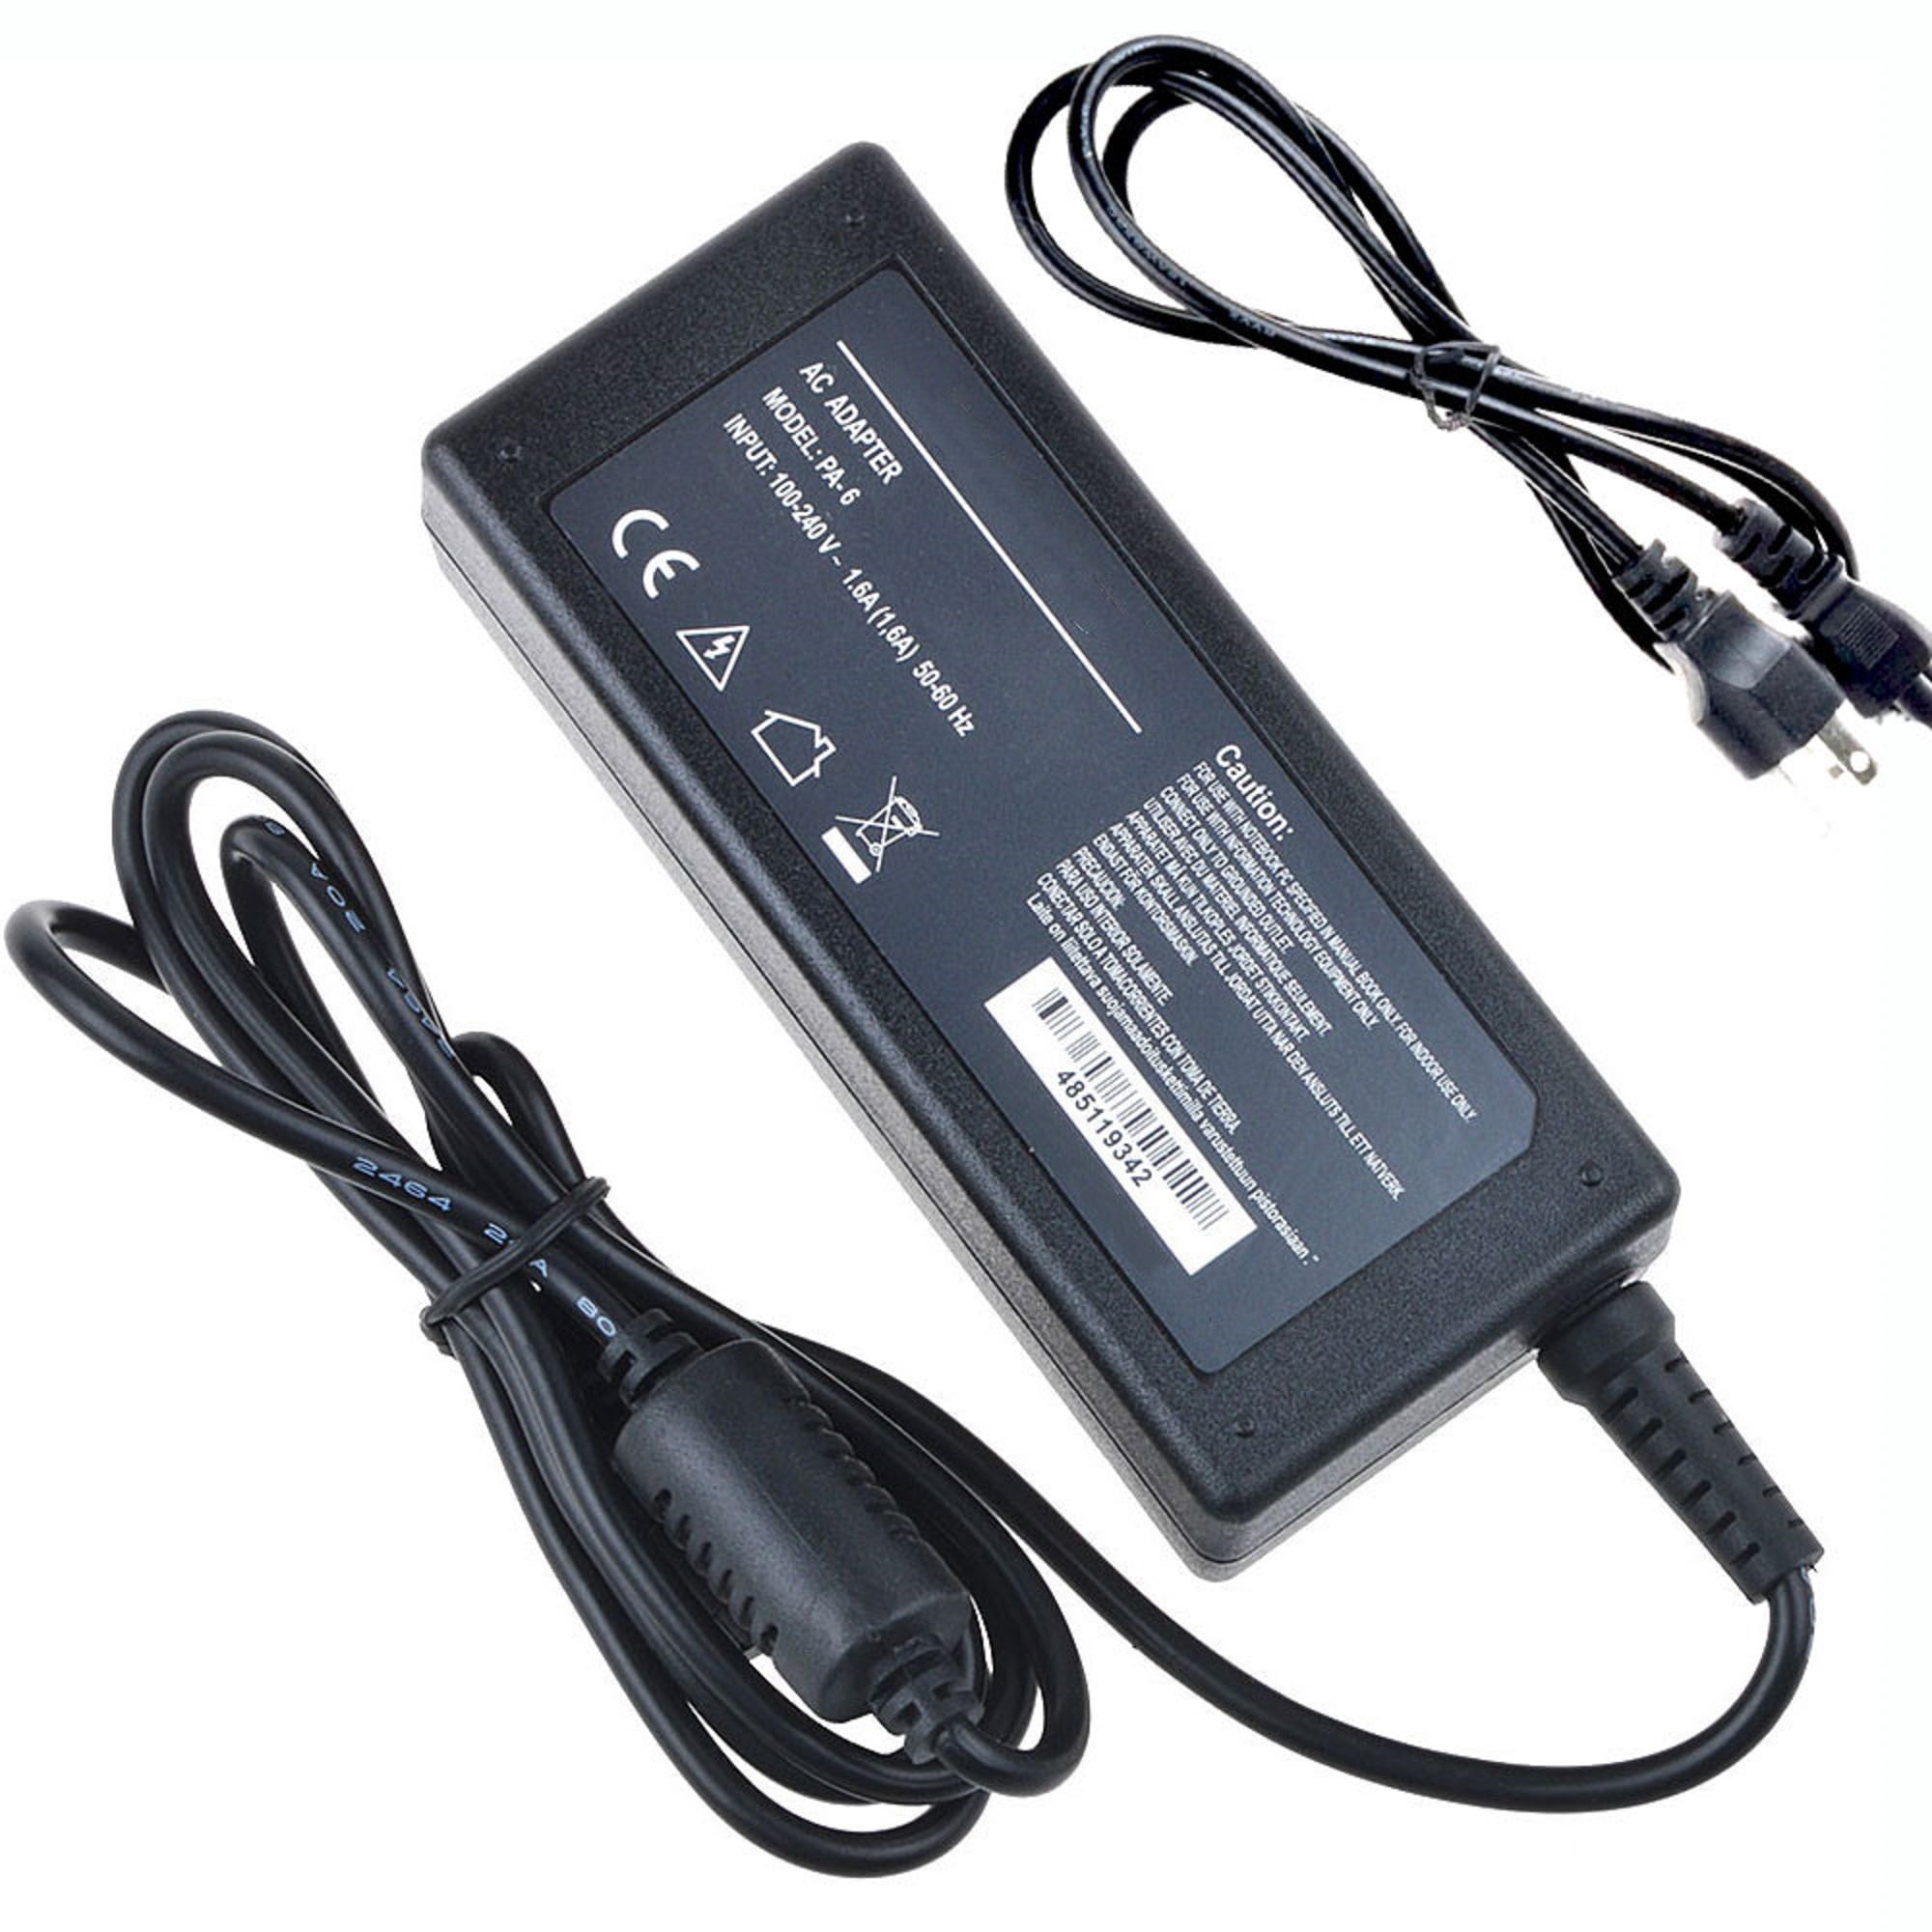 Imperio Inca Ambos Islas Faroe K-MAINS 19V 3.42A 65W AC/DC charger Replacement for DELTA Electronics, Inc.  N17908 V85 R33030 Laptop Notebook PC 19VDC 3.42 Amp 65 Watts Power Supply  Cord Cable Battery Charger - Walmart.com